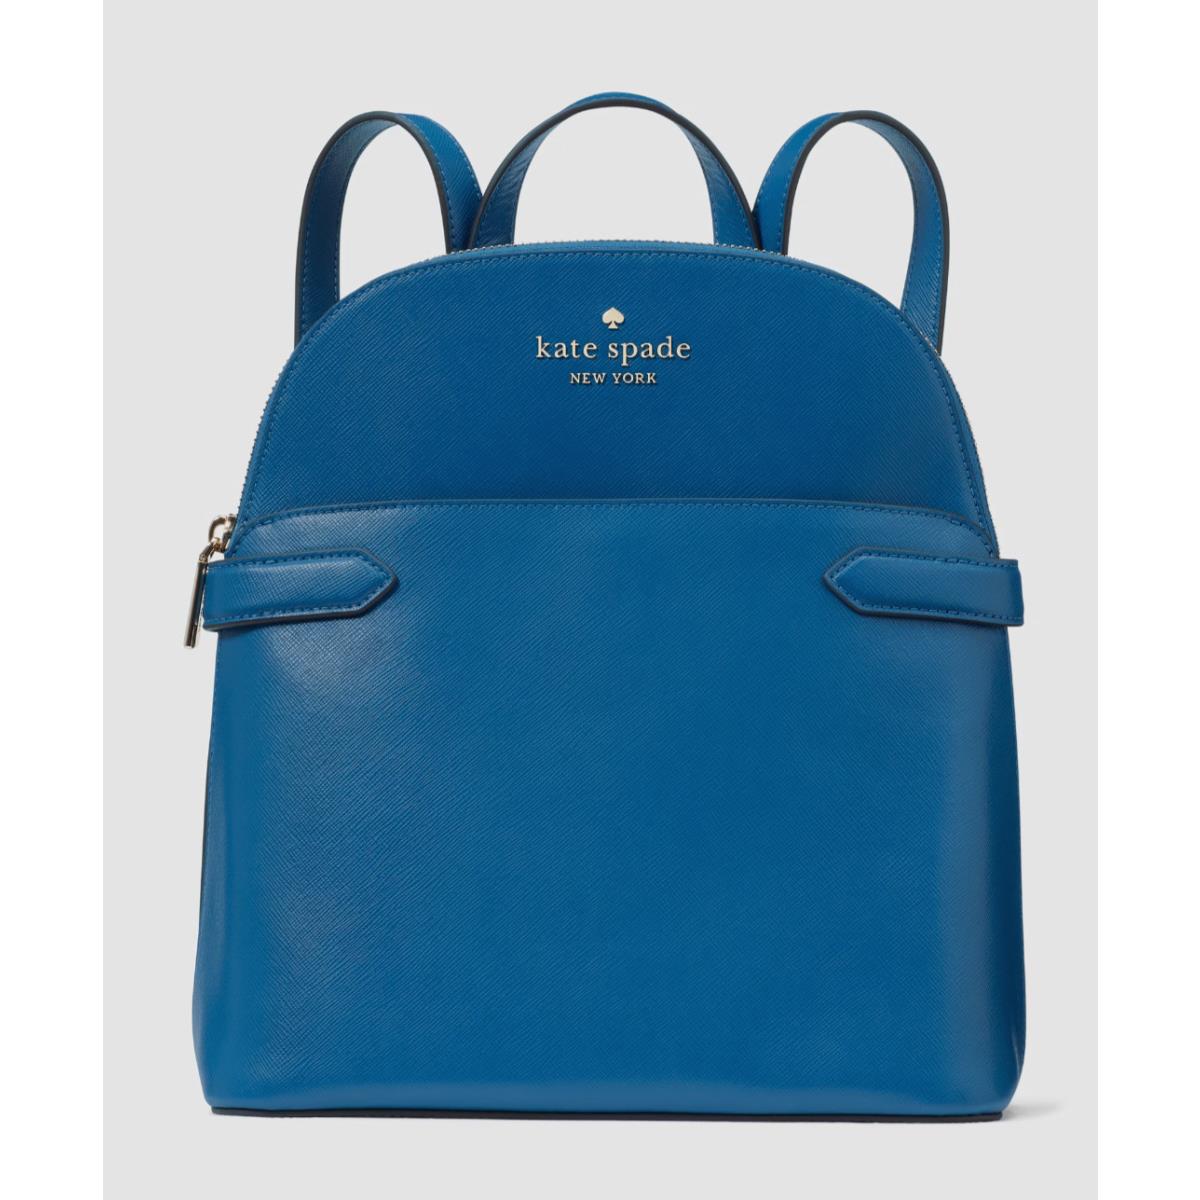 New Kate Spade Staci Saffiano Leather Dome Backpack Sapphire Ice with Dust Bag